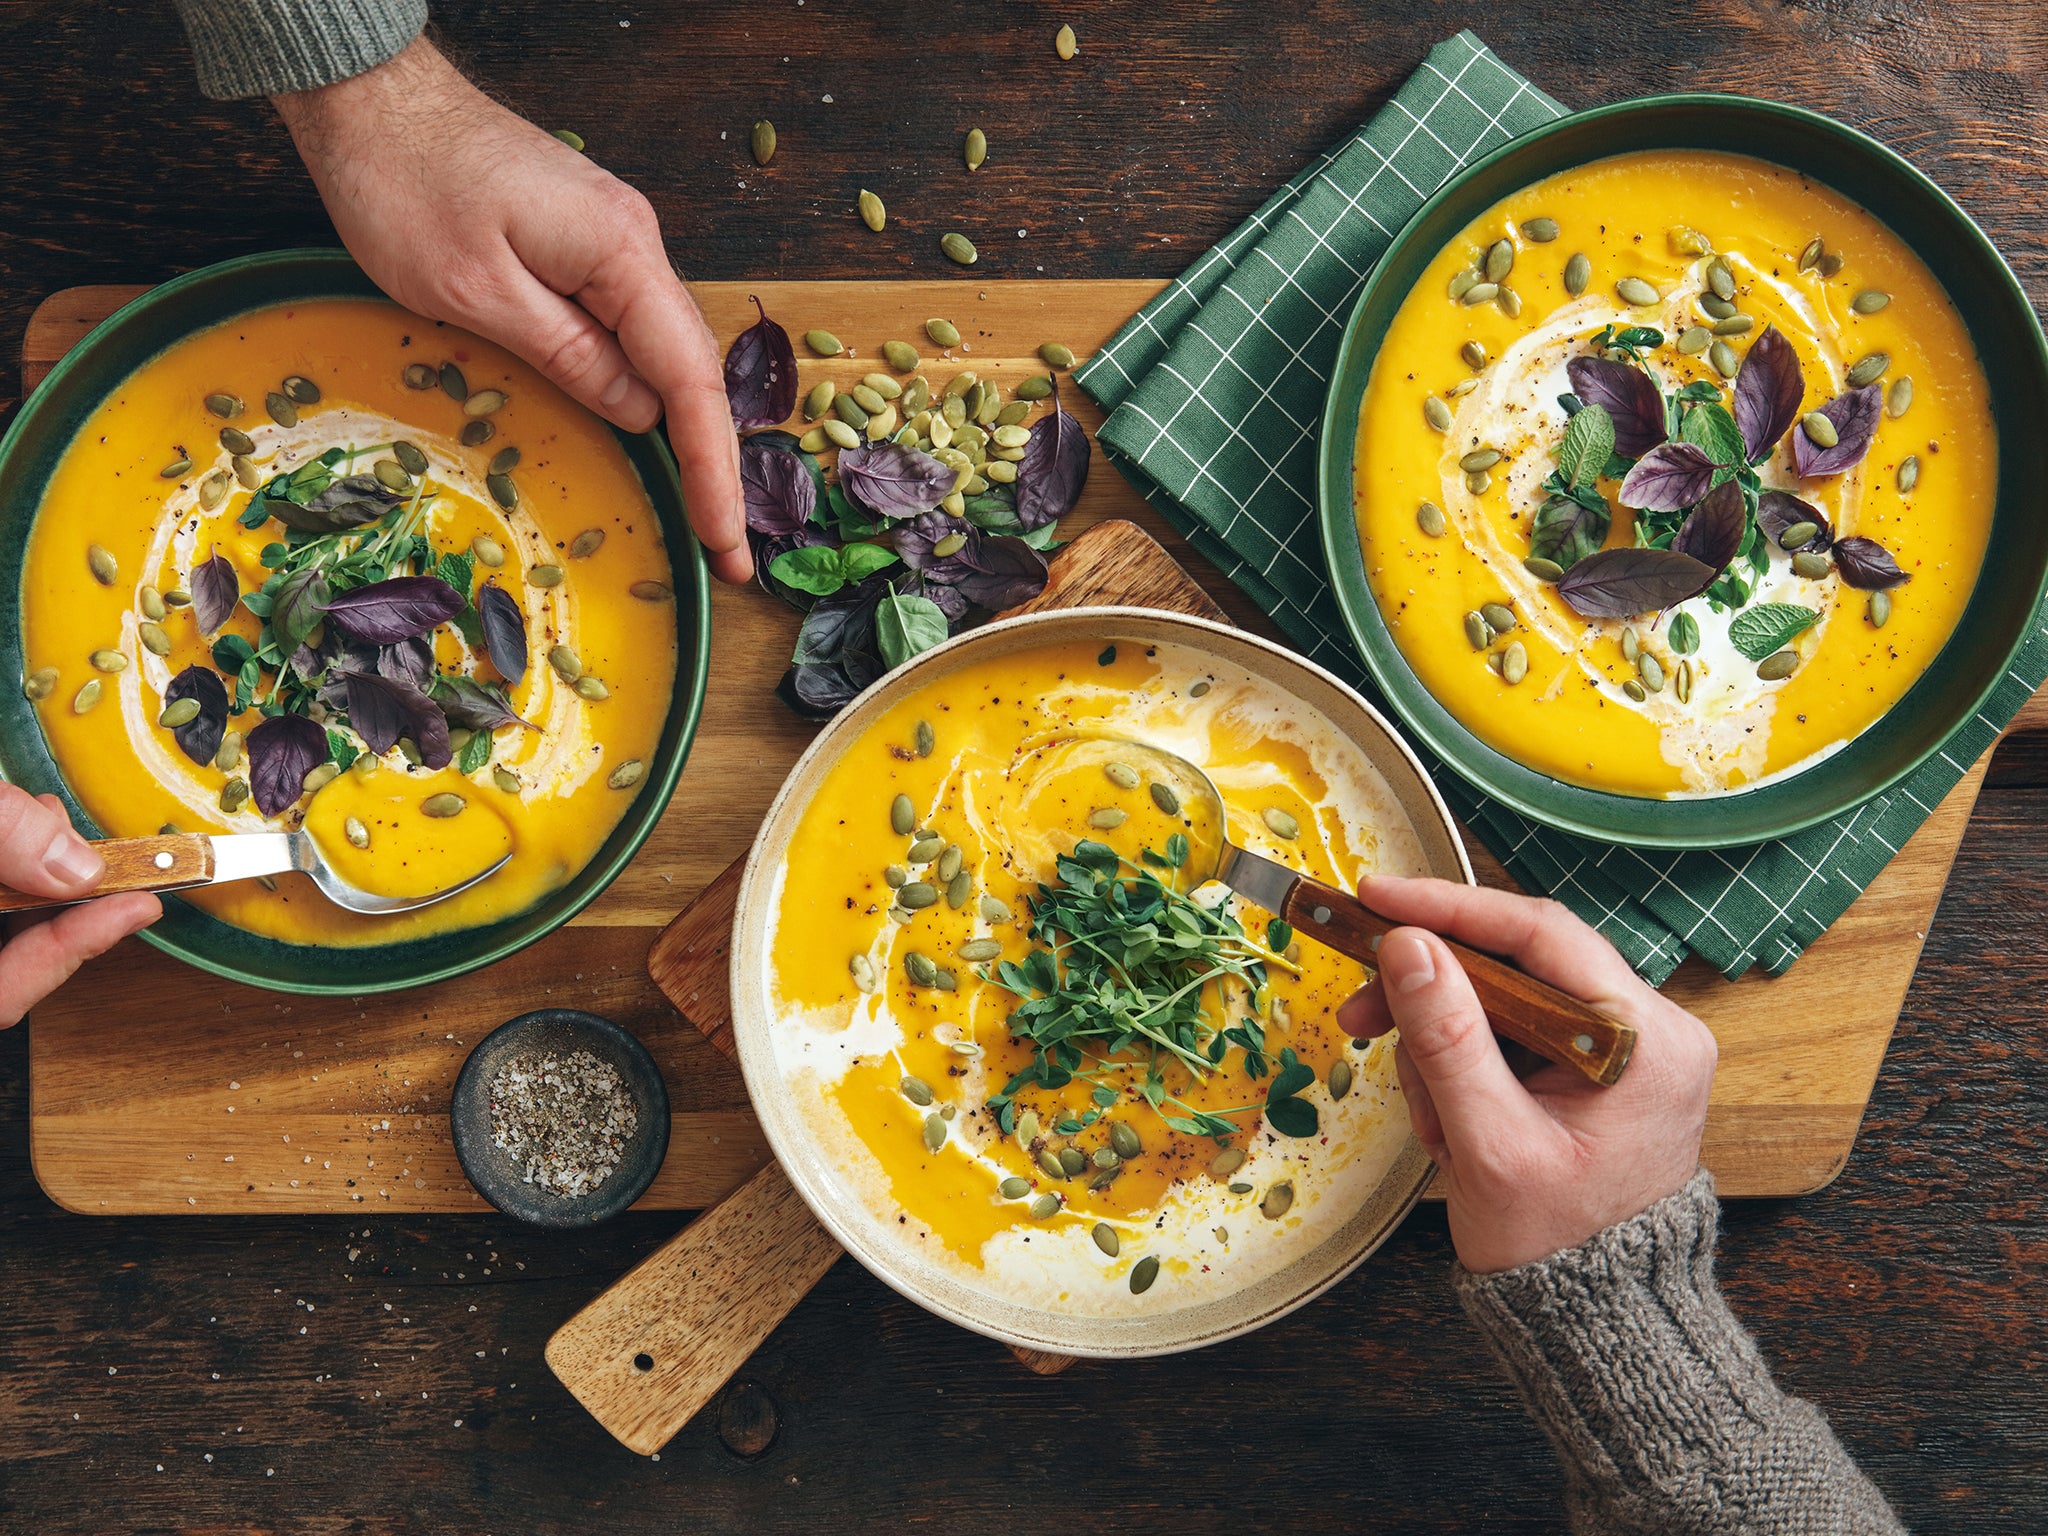 A hearty pumpkin soup is the perfect winter warmer